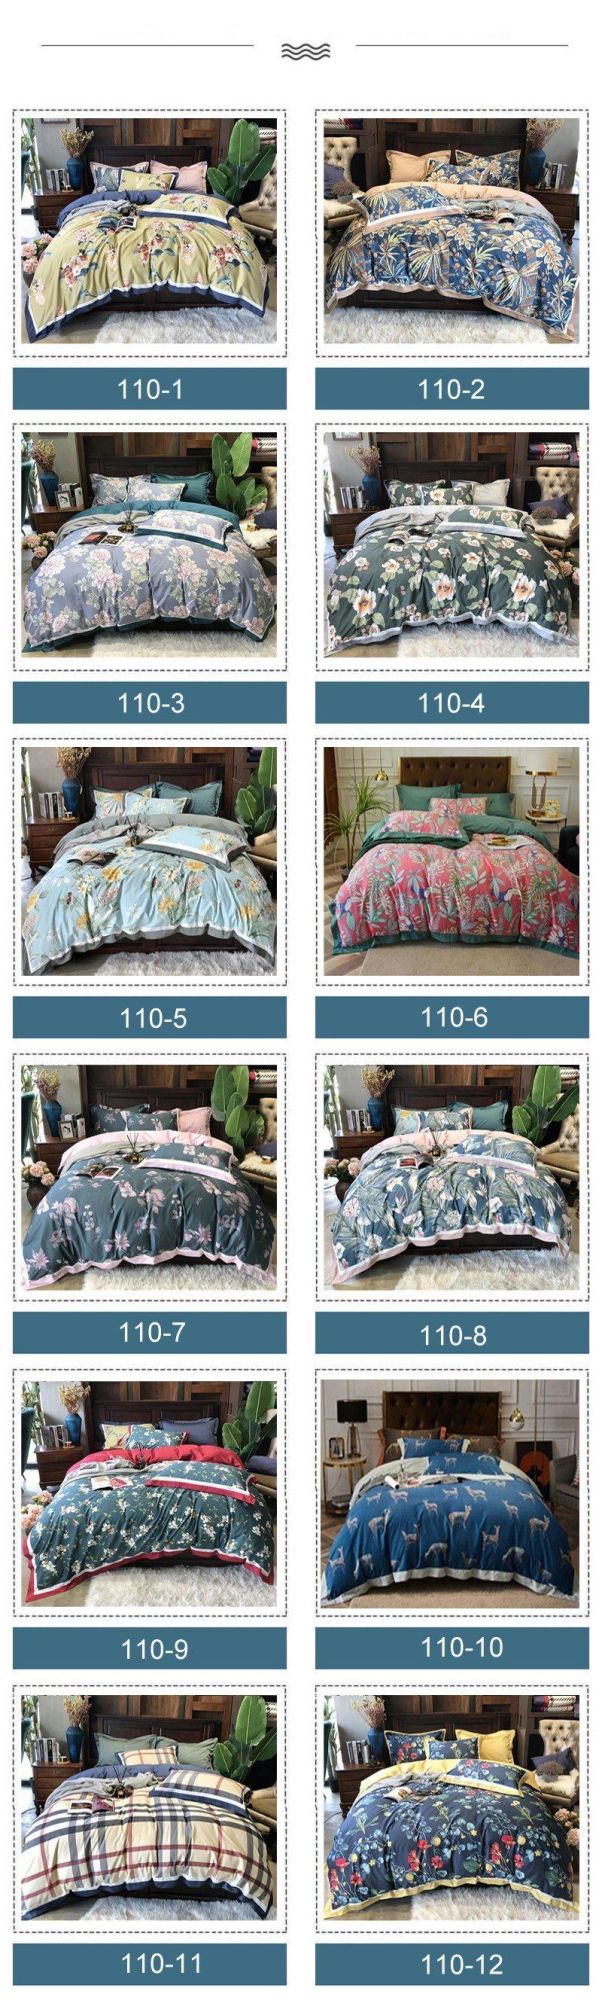 Home Textile Good Quality Bedding Set Cotton Brushed Fabric Soft for 4PCS King Bed